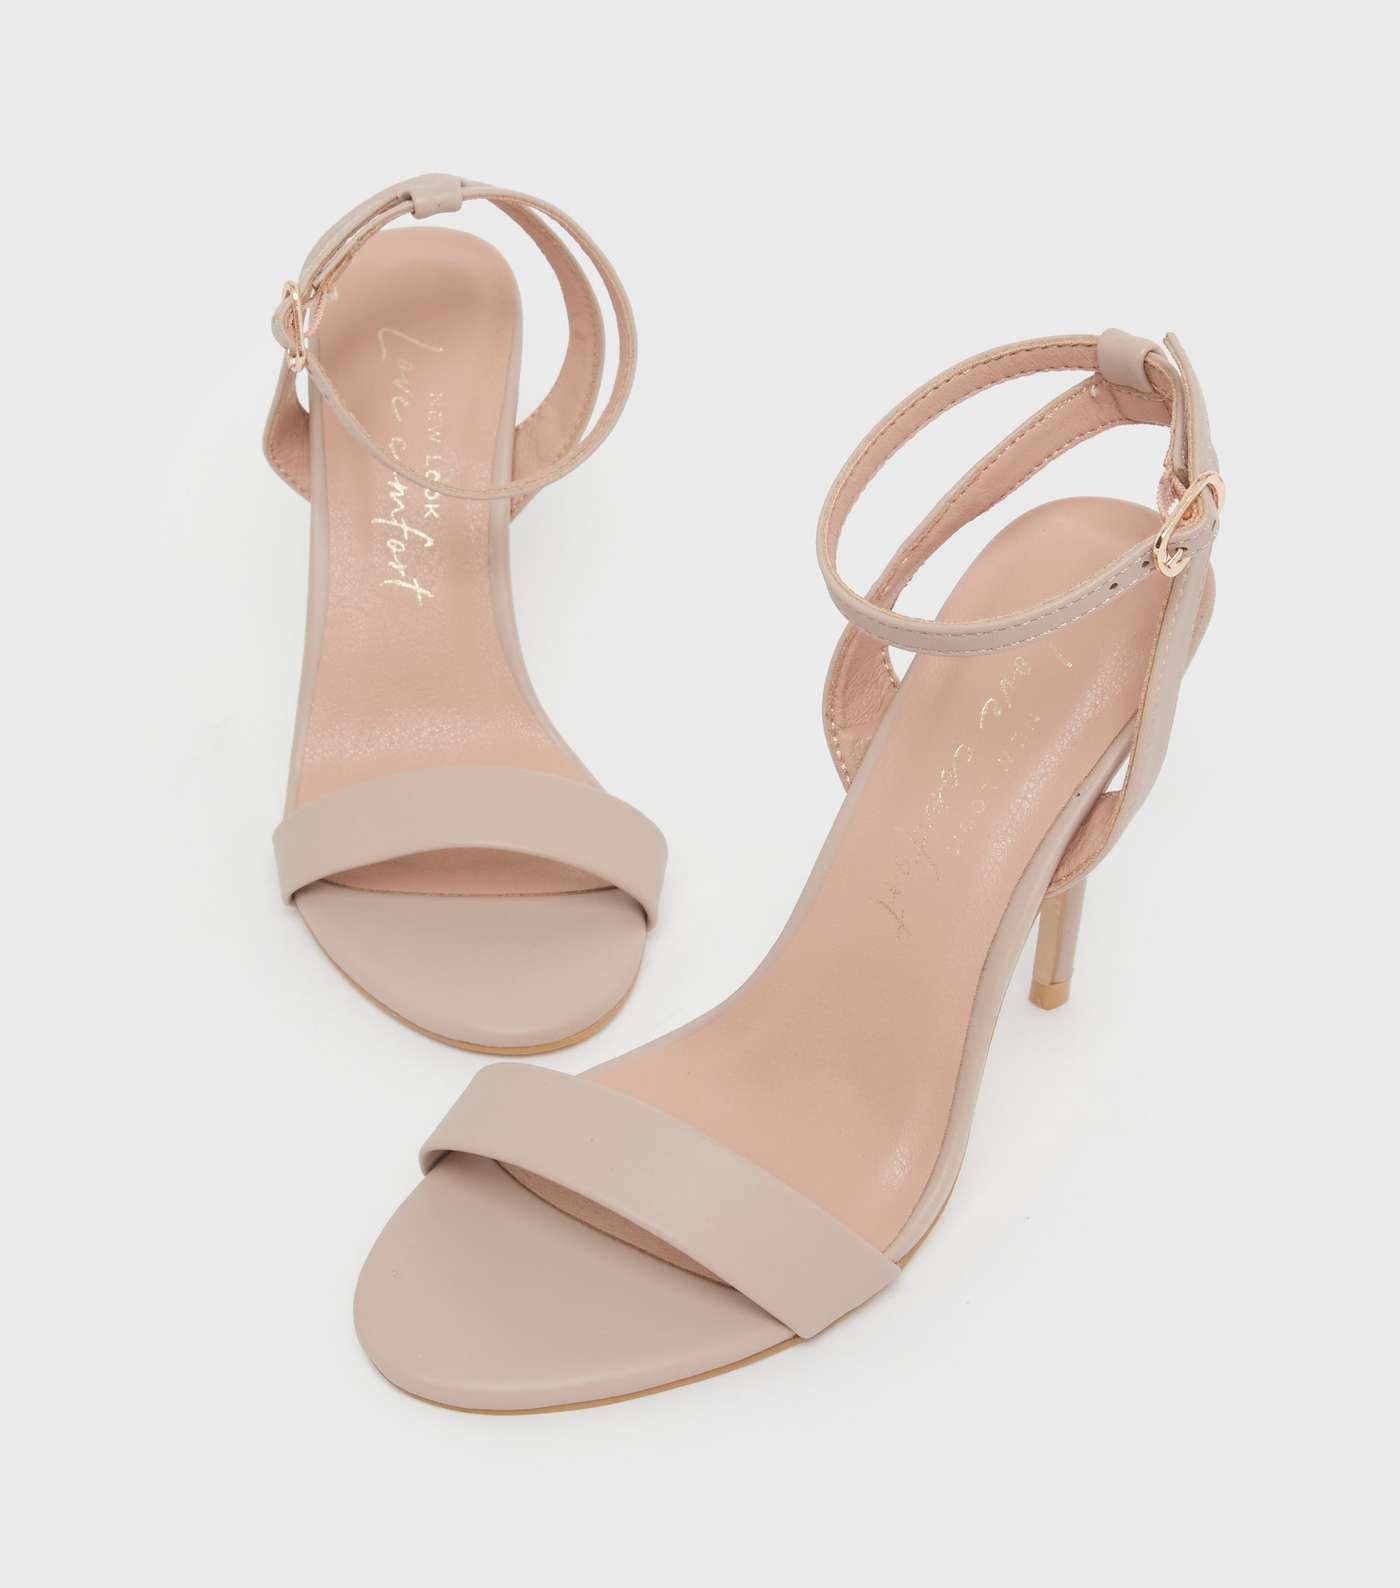 Pale Pink Leather-Look Stiletto Heel Sandals Image 3